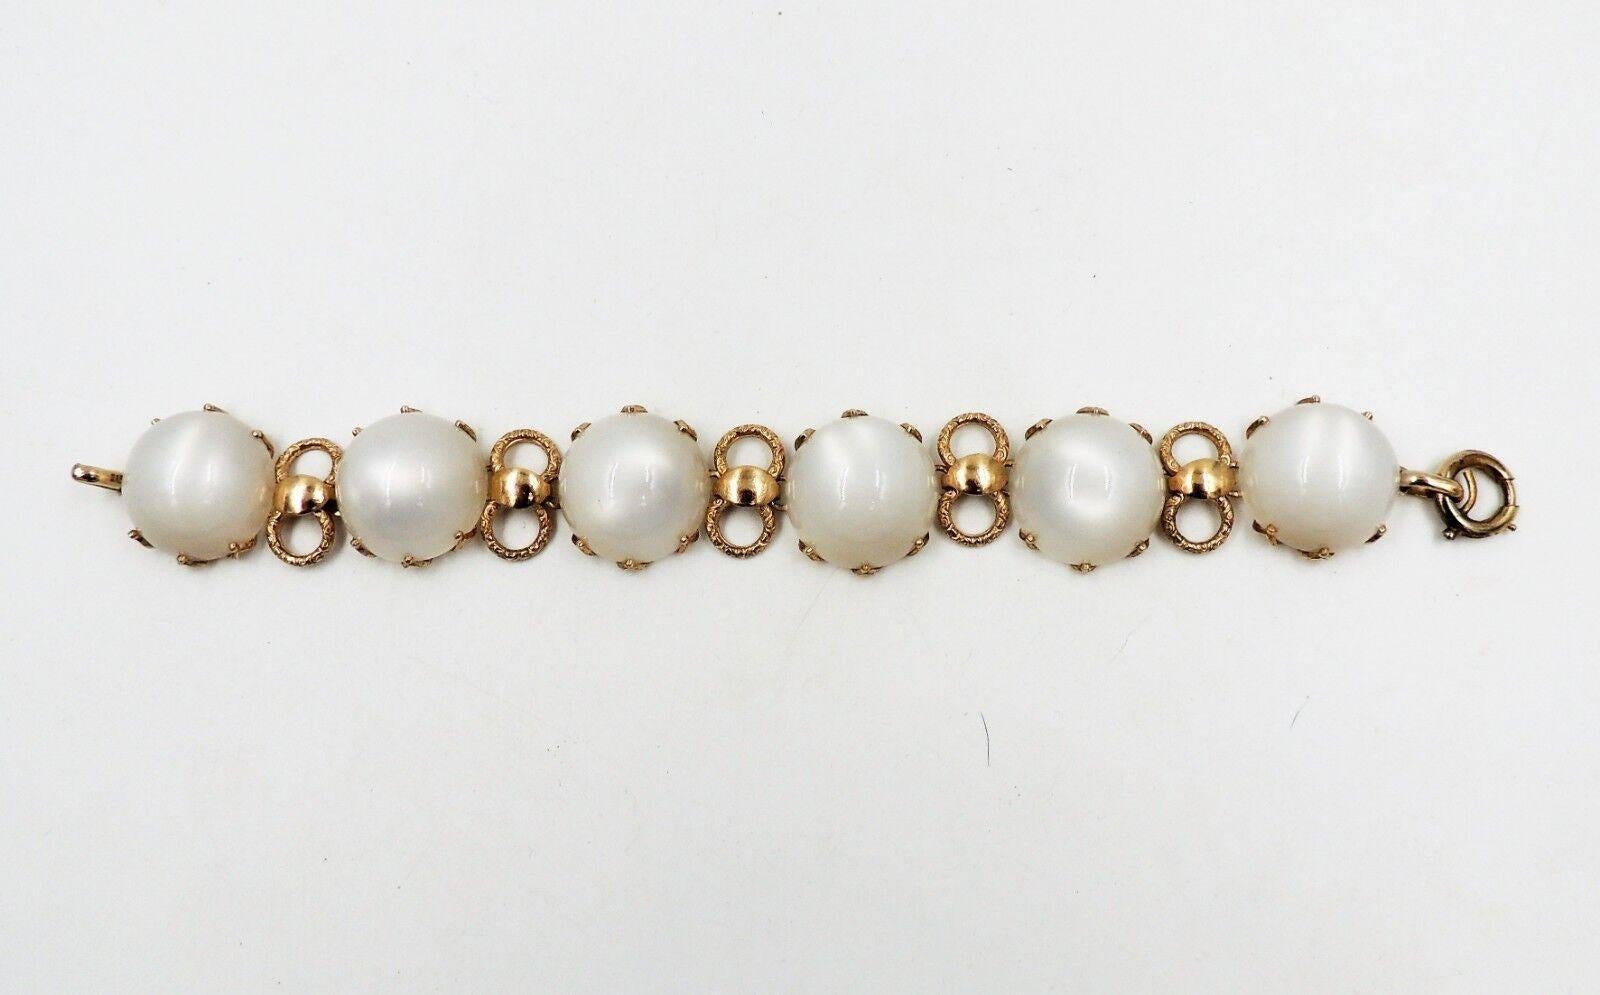 Vintage 1950s Signed Napier Goldtone Cabochon Faux-Moonstone Bracelet In Good Condition For Sale In Easton, PA